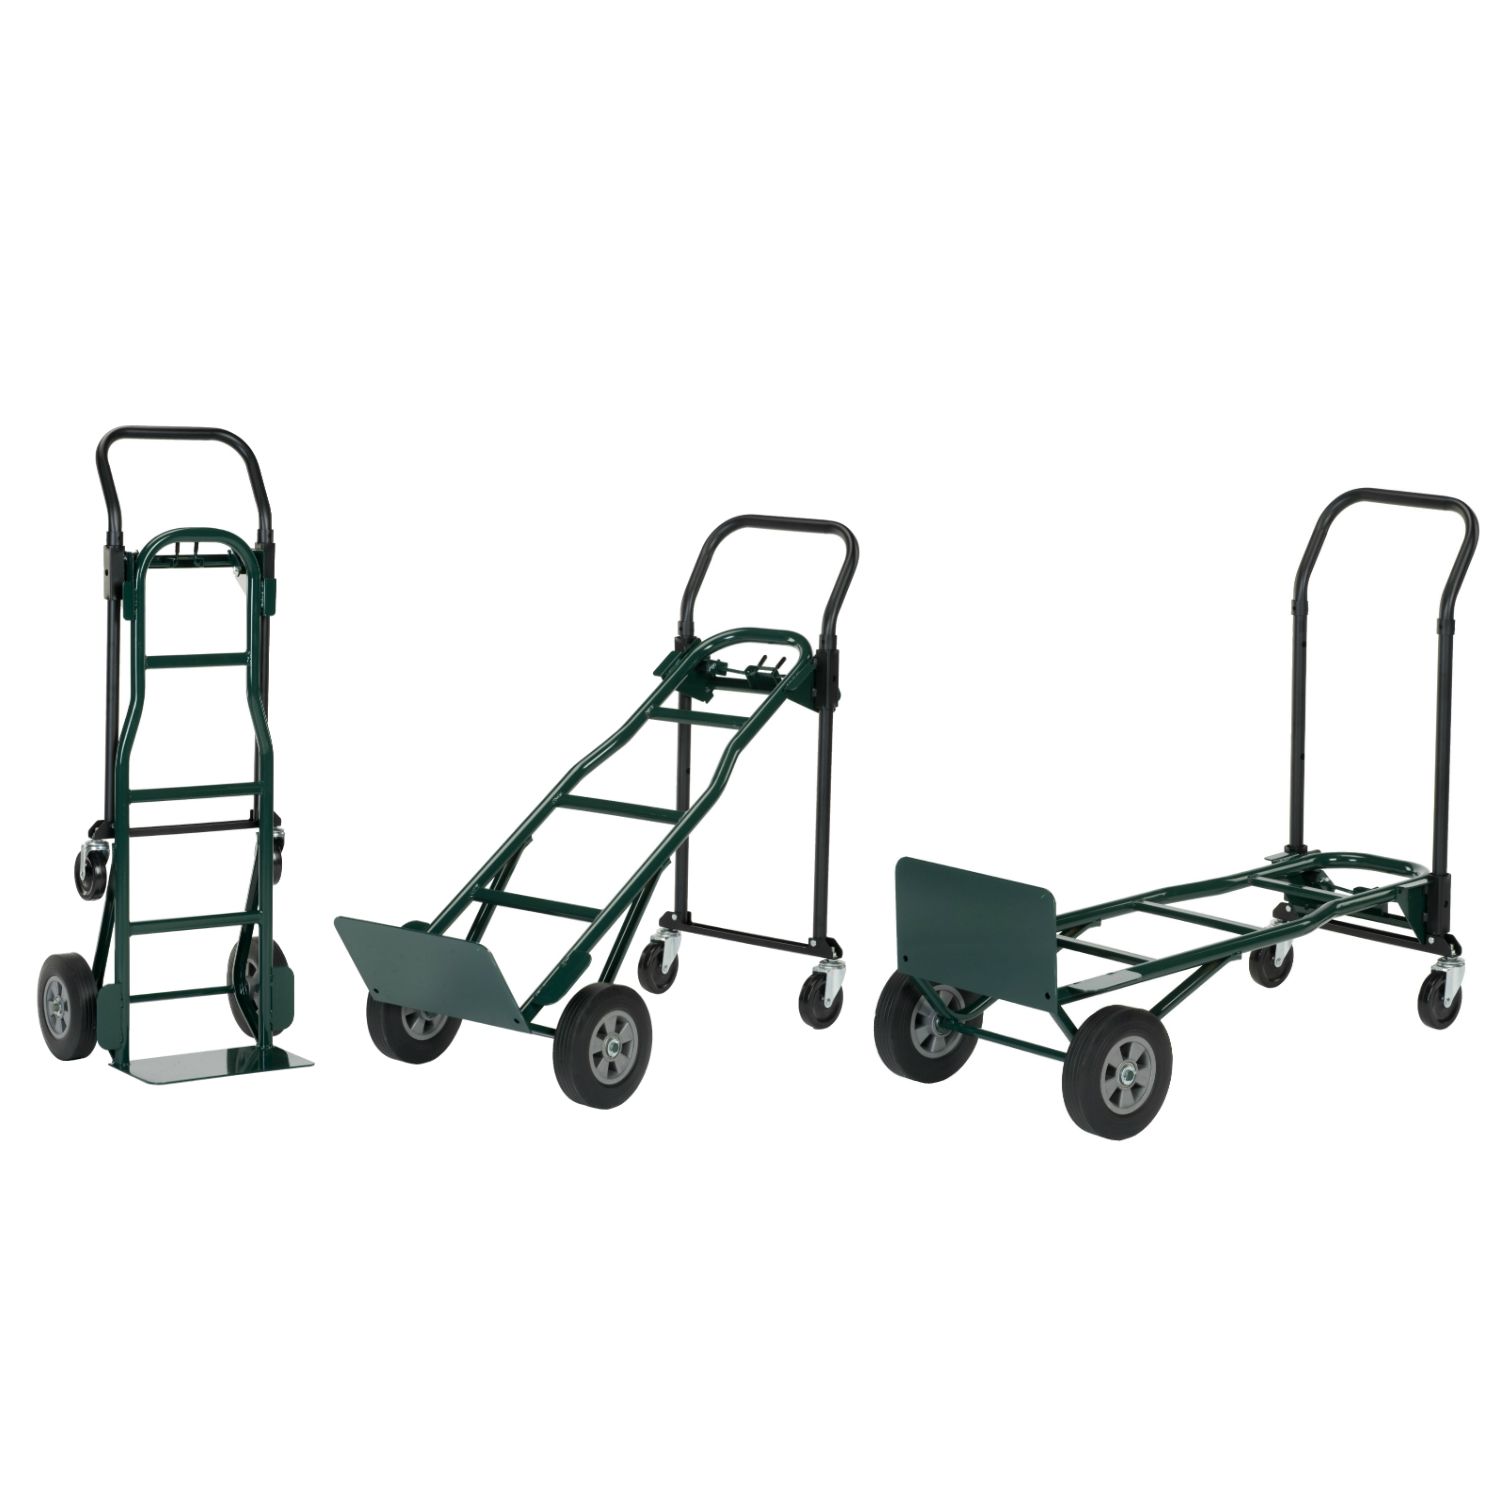 a set of four green hand trucks on a white background .